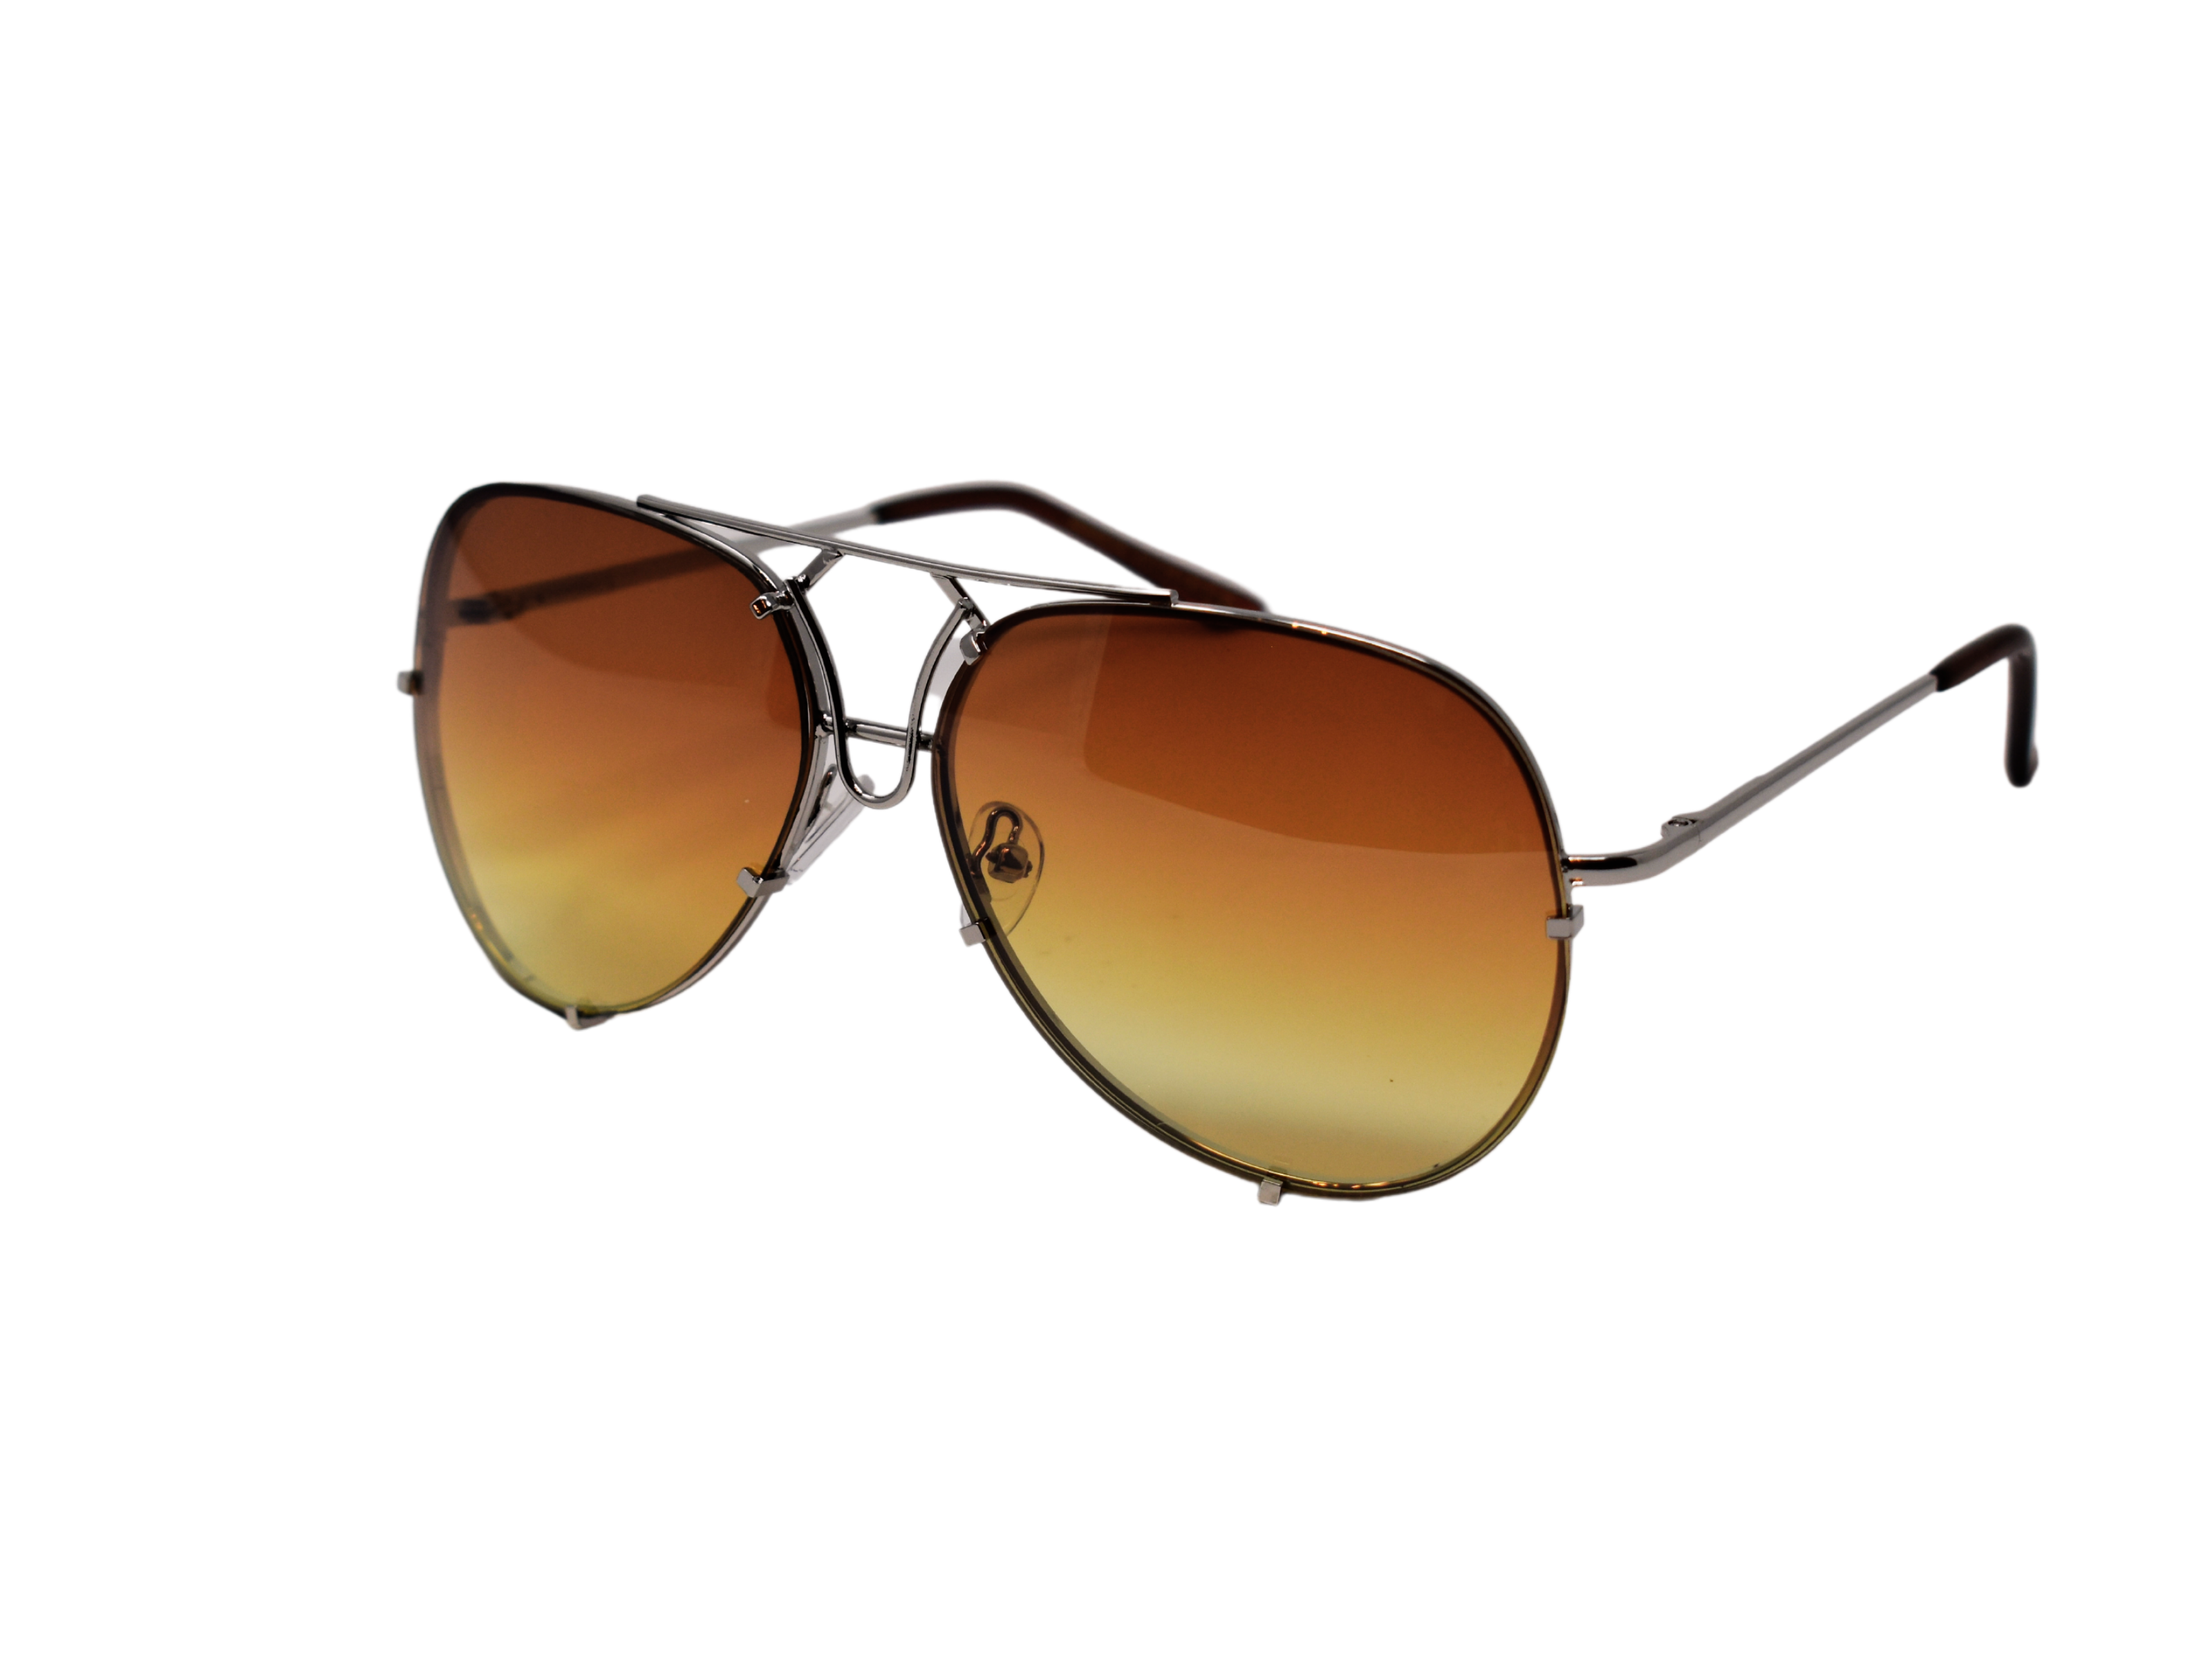 Make sure you indulge in our brilliant Viburnum Brown lens aviator style glasses with a silver frame. 